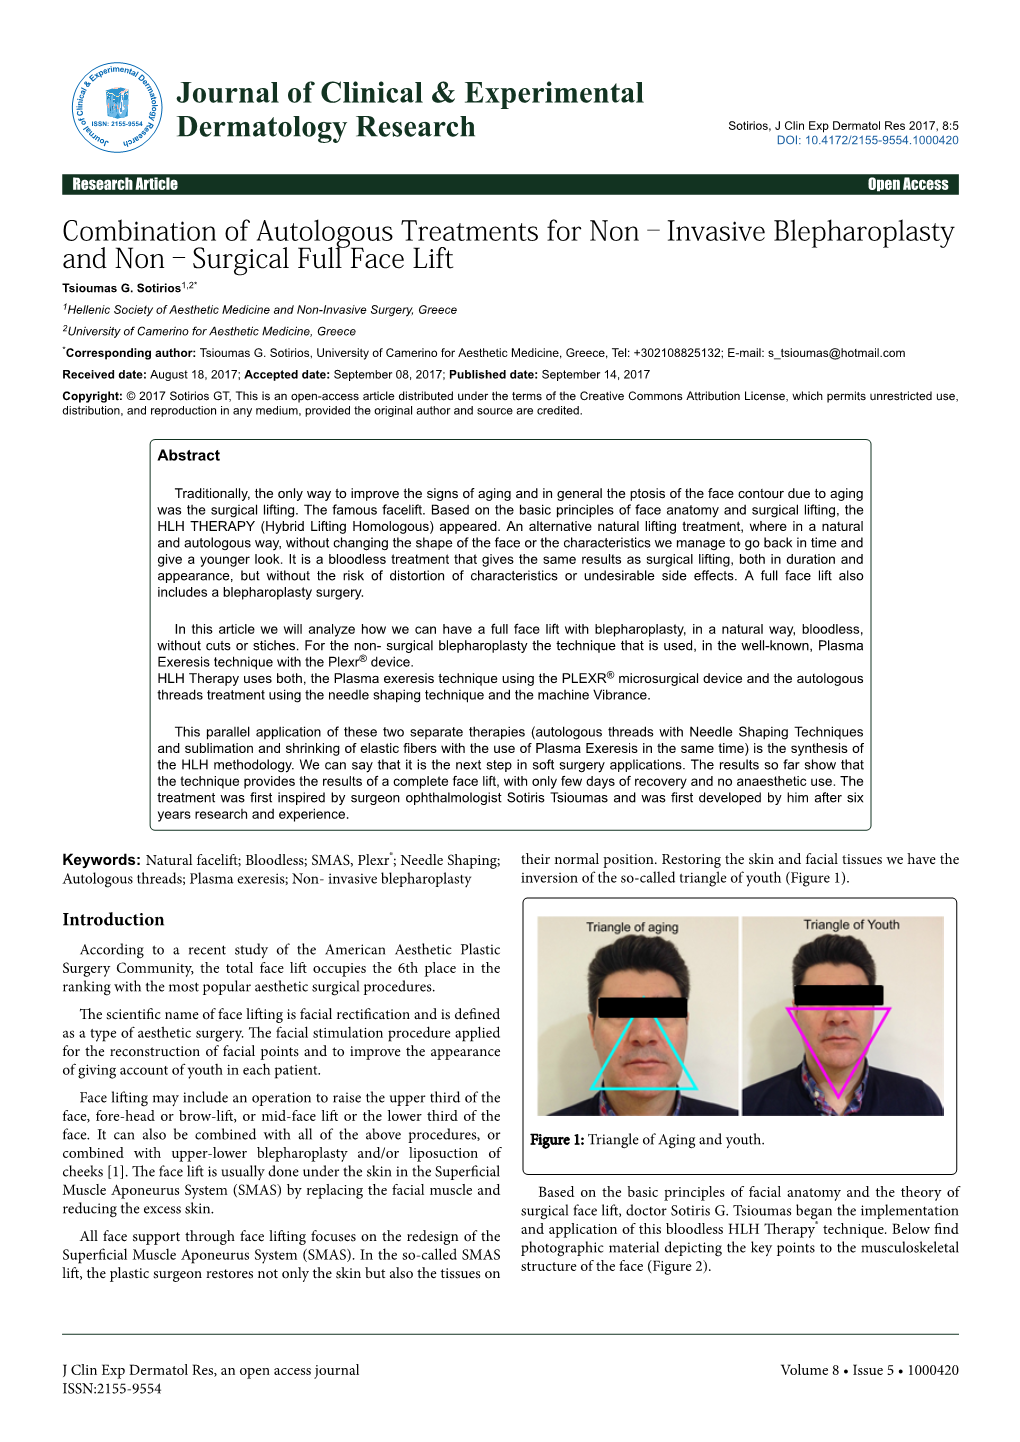 Combination of Autologous Treatments for Non–Invasive Blepharoplasty and Non–Surgical Full Face Lift Tsioumas G